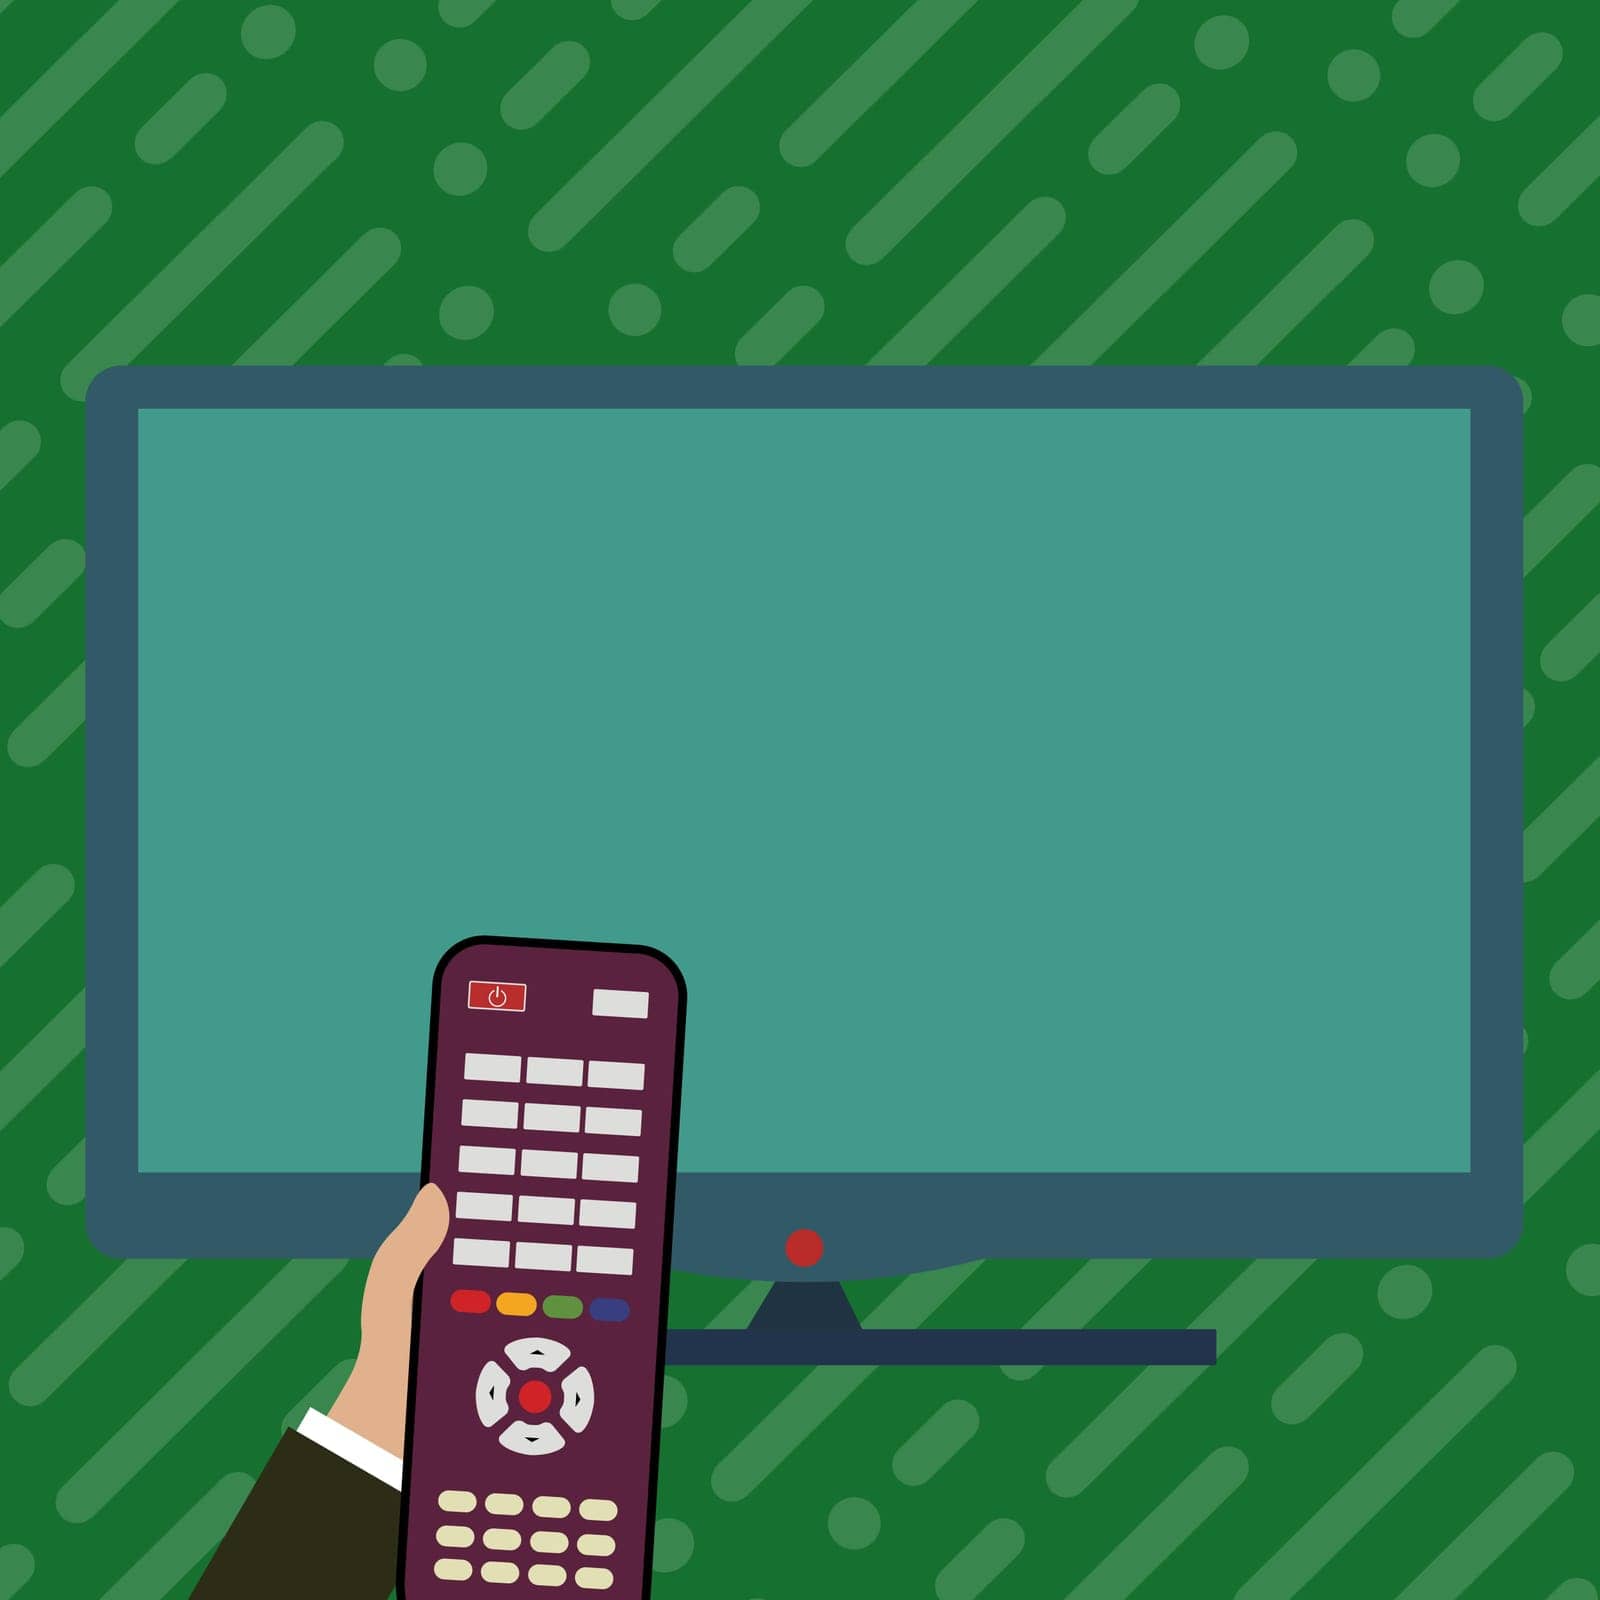 Illustration with TV and hand holding remote control. Important information on screen. Monitor contains Main message. Display on Bright colored background. by nialowwa